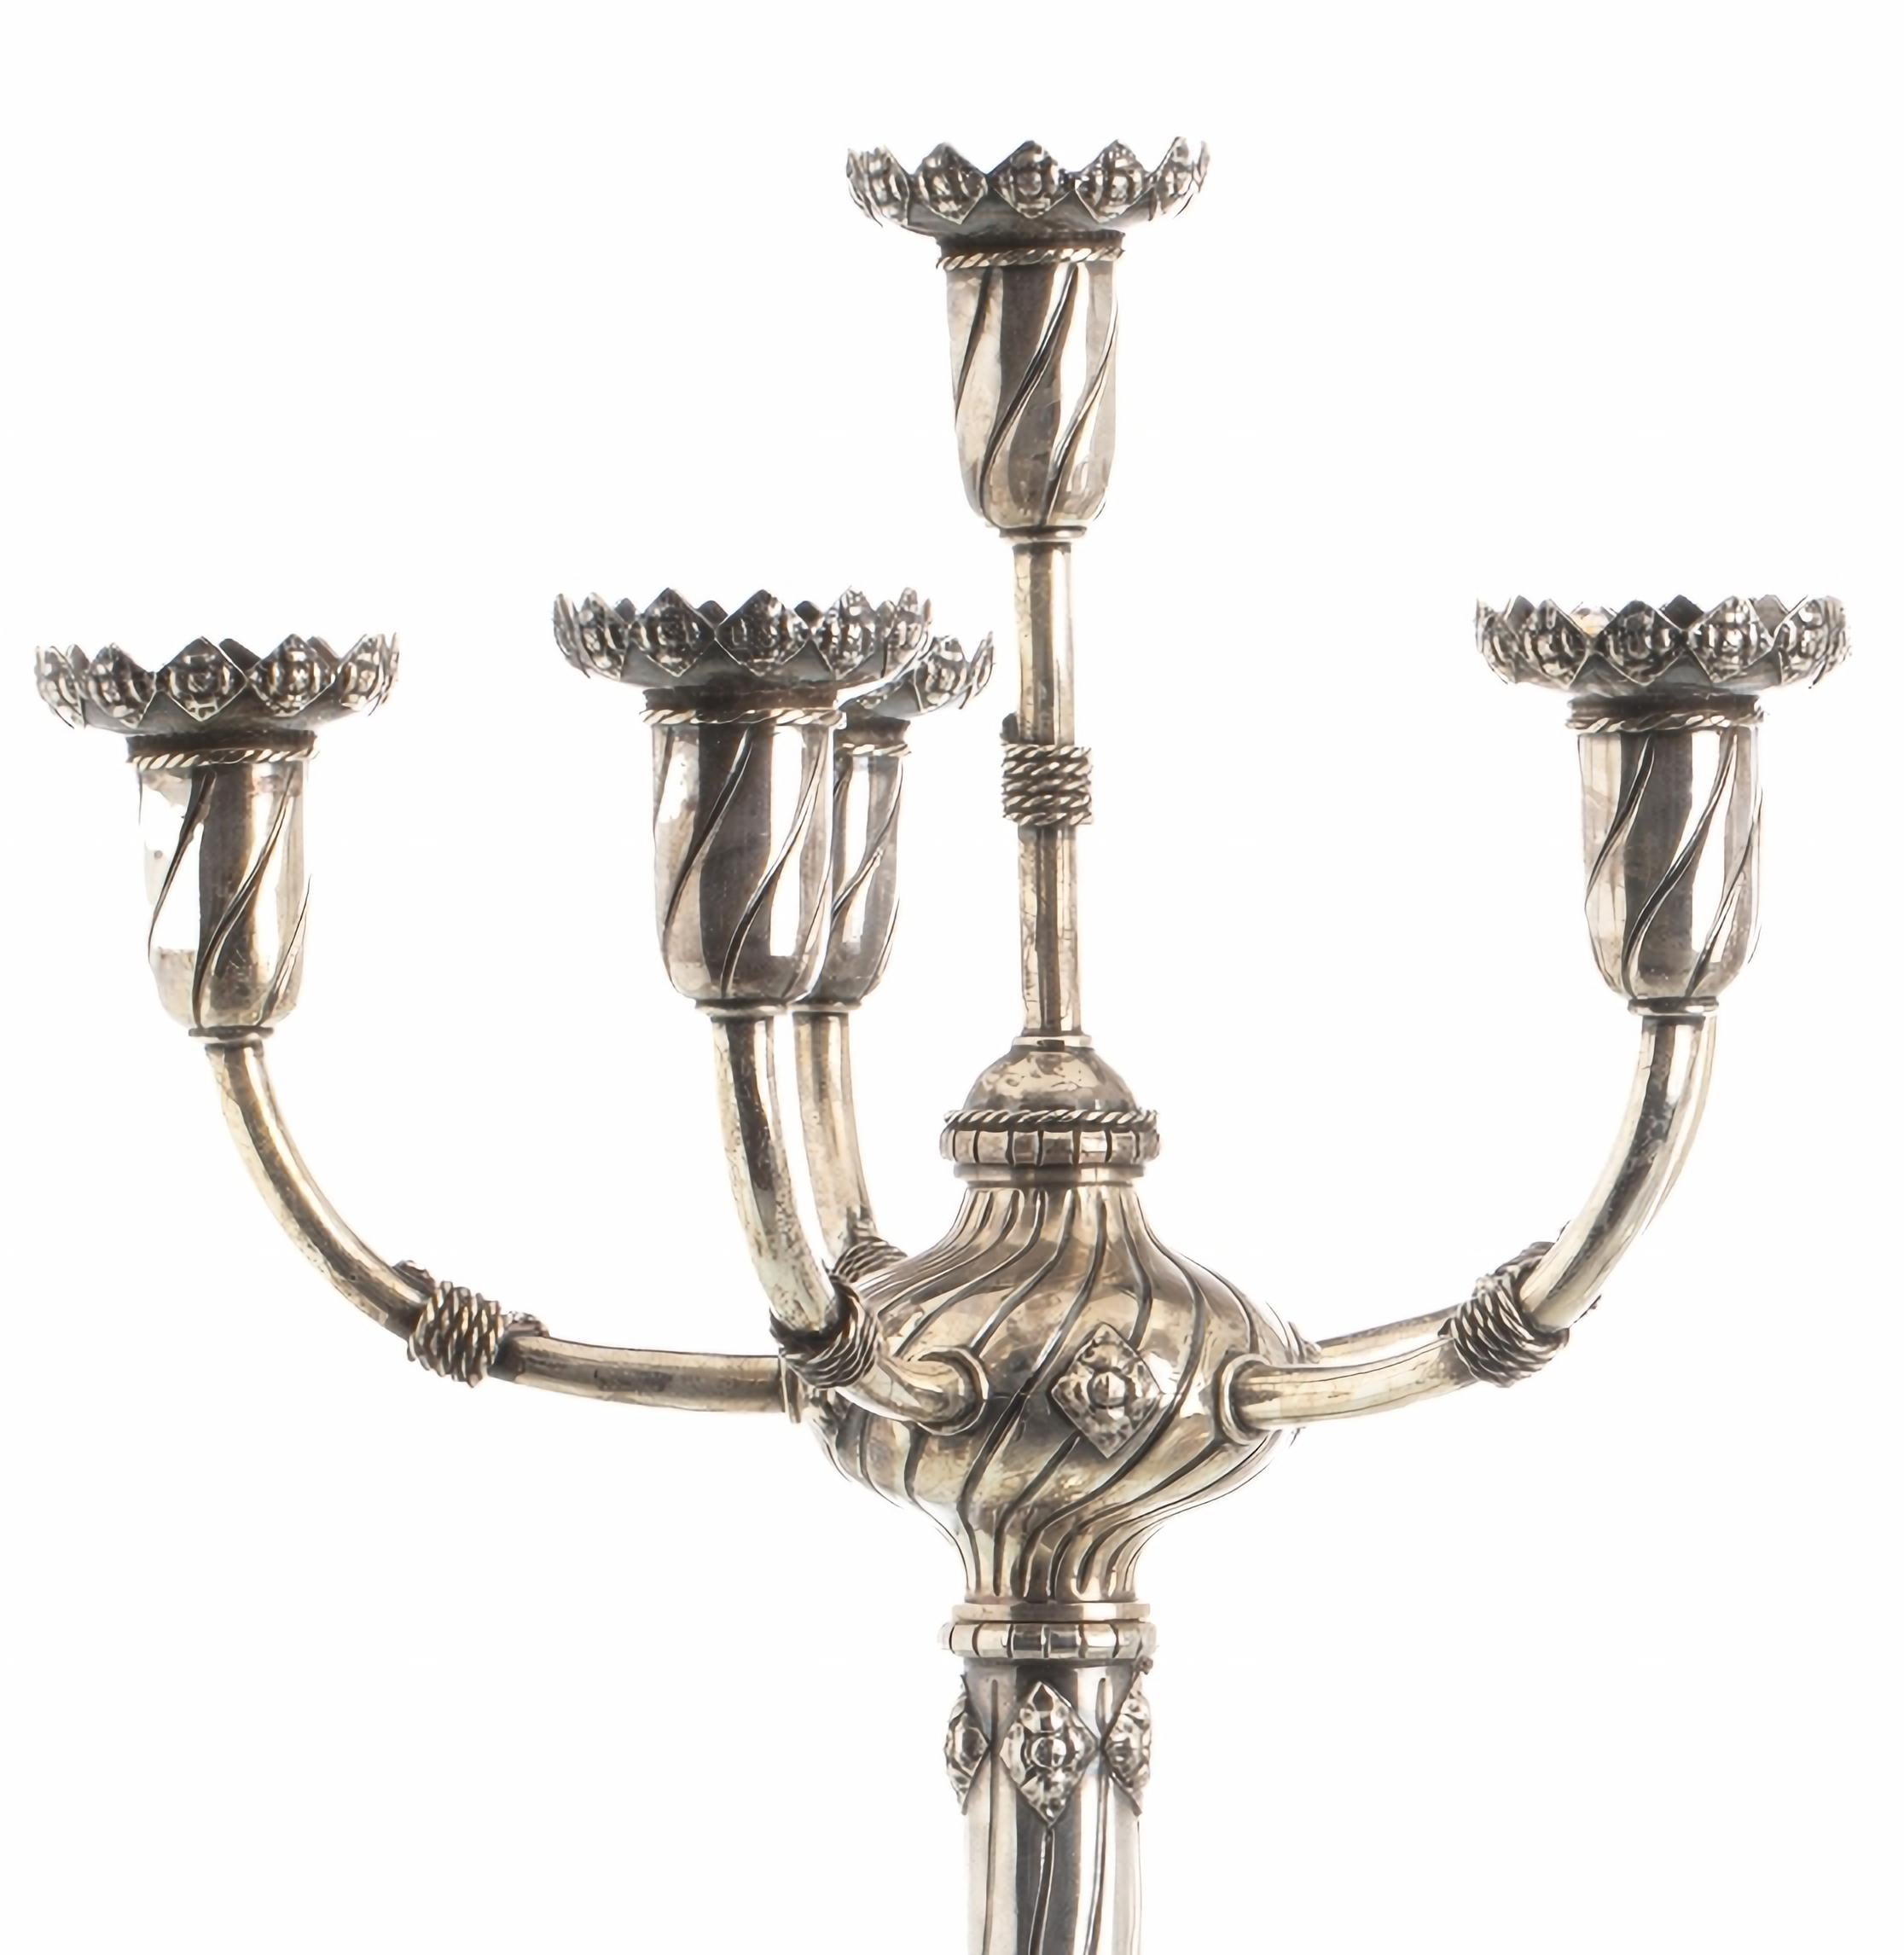 PAIR OF PORTUGUESE FIVE-LIGHT SILVER CANDLESTICKS 19th Century

Neo-Manueline-inspired work, decorated with windings, foliage, armillary spheres and Portuguese shields. With Lisbon contrast (Javali I), 1st title, 916 thousandths.
  Weight approx.: